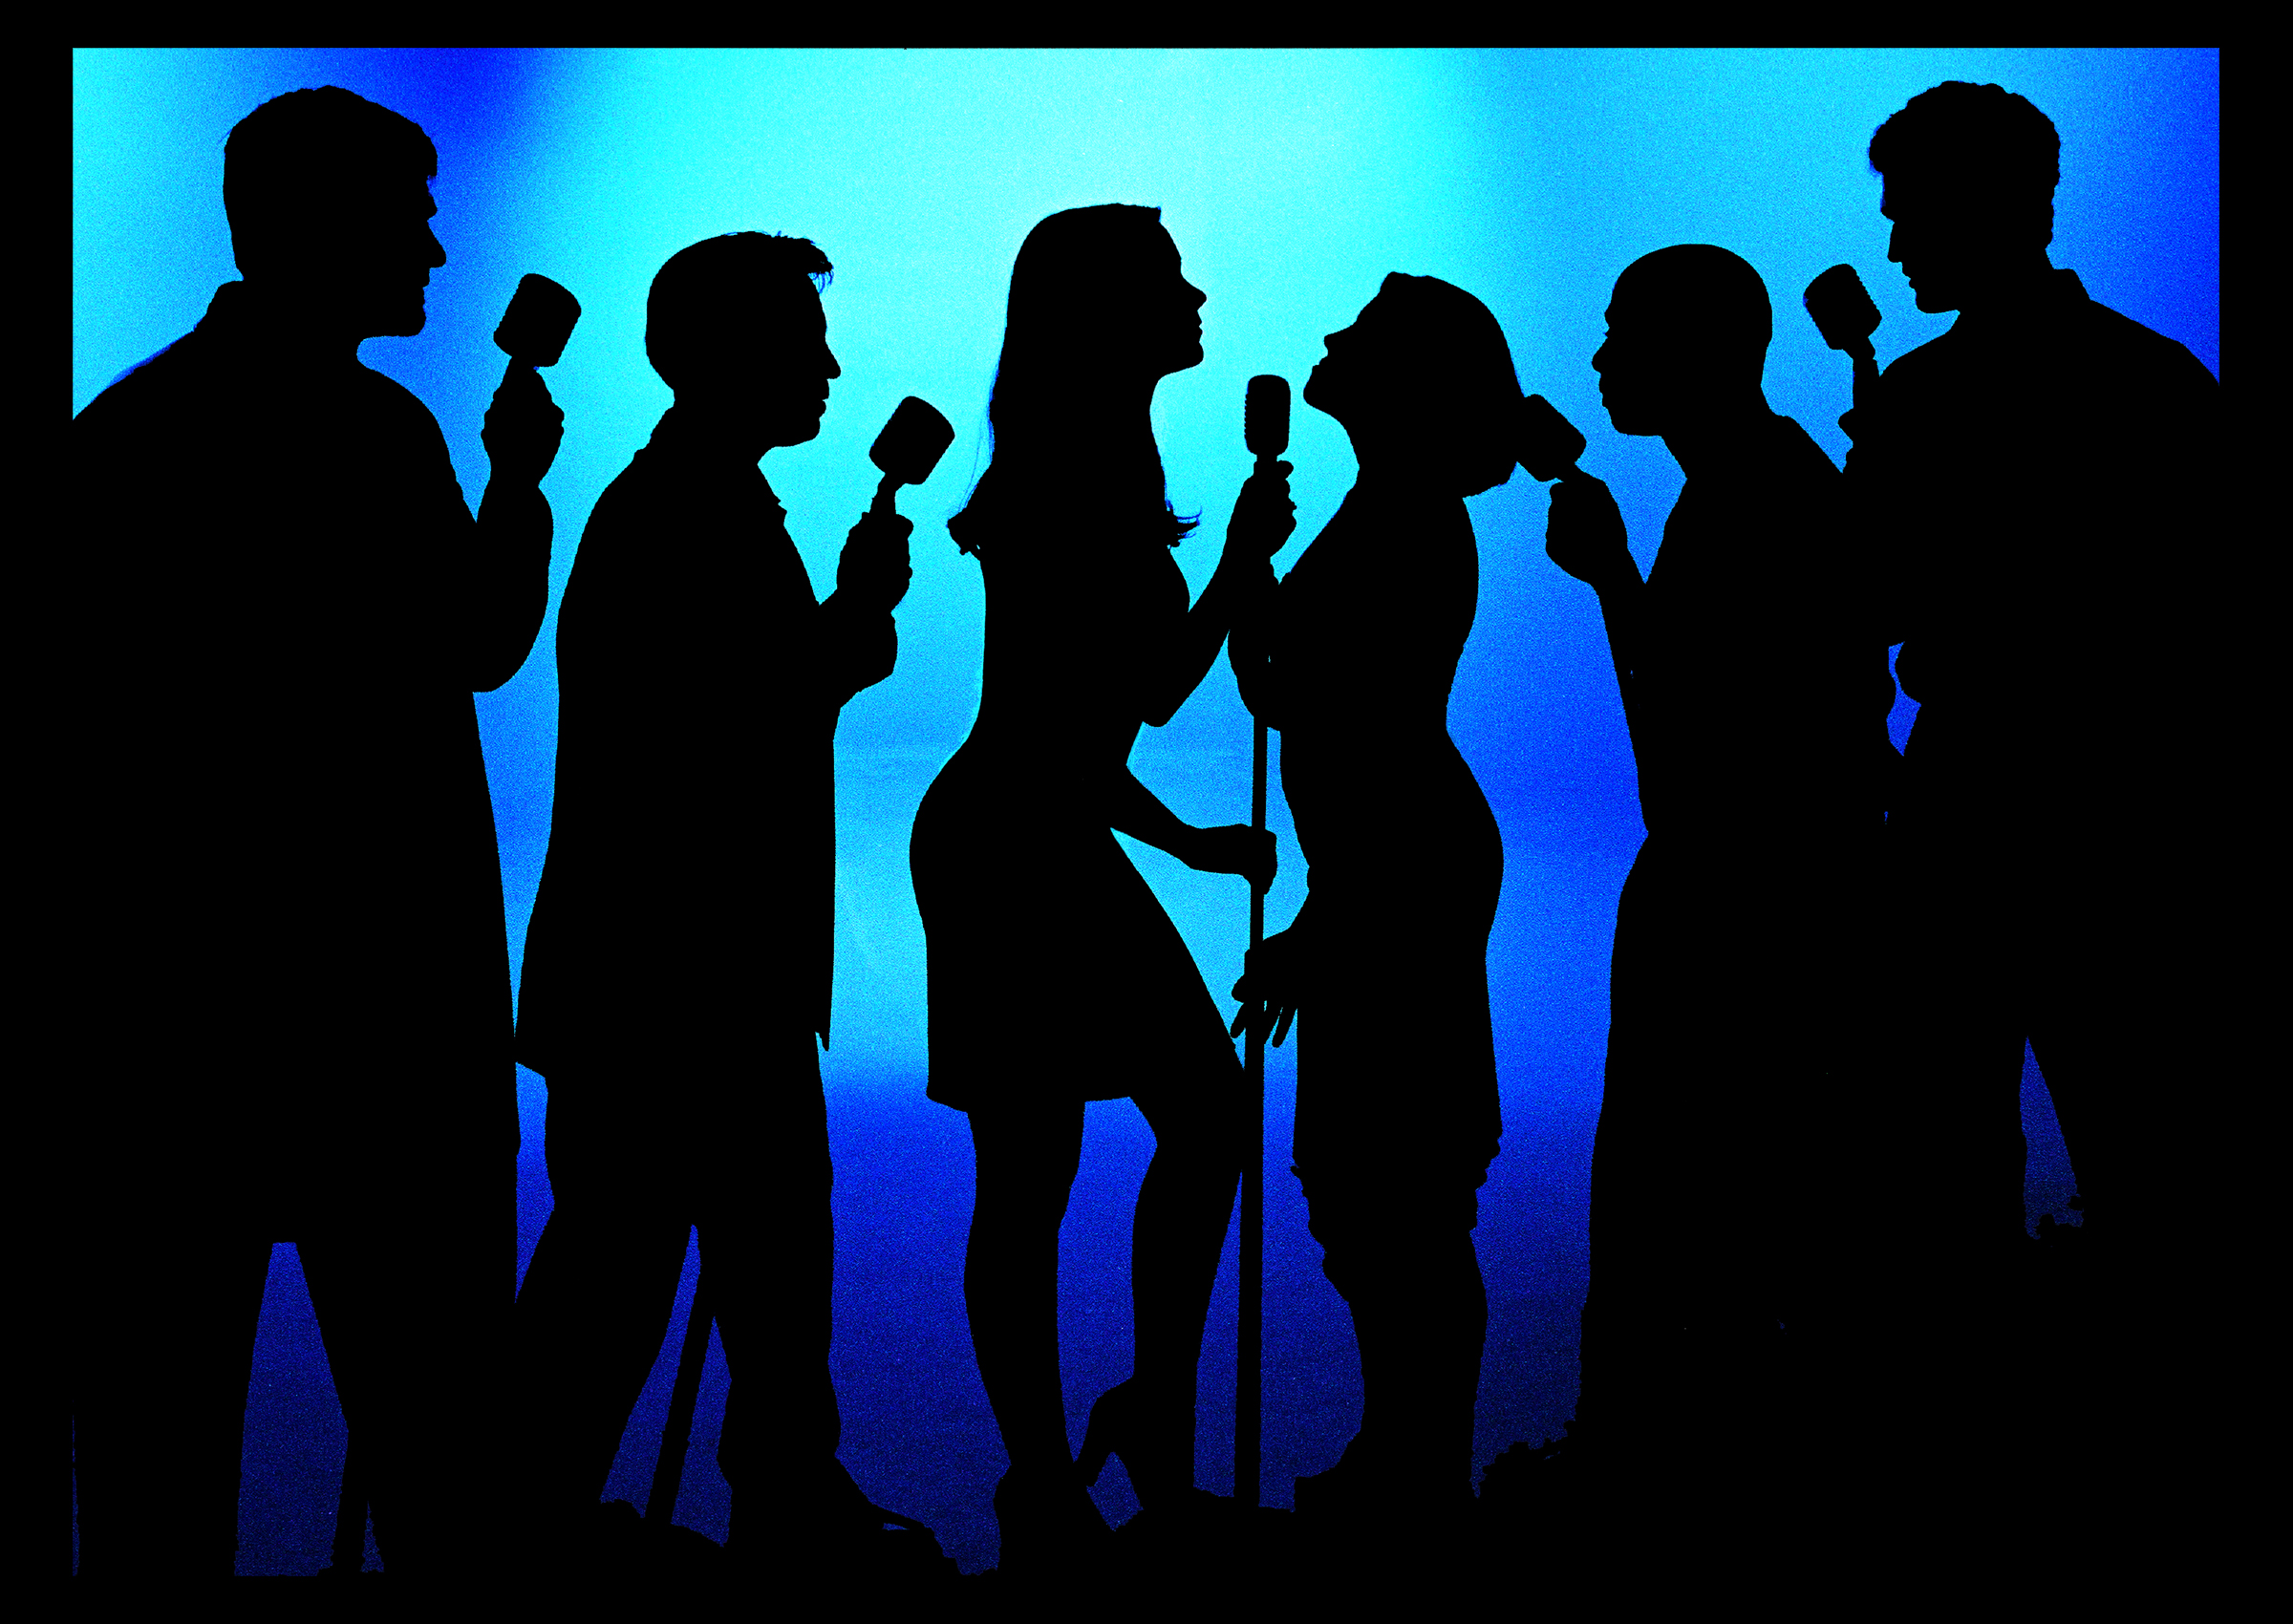 Singing Group Clipart.